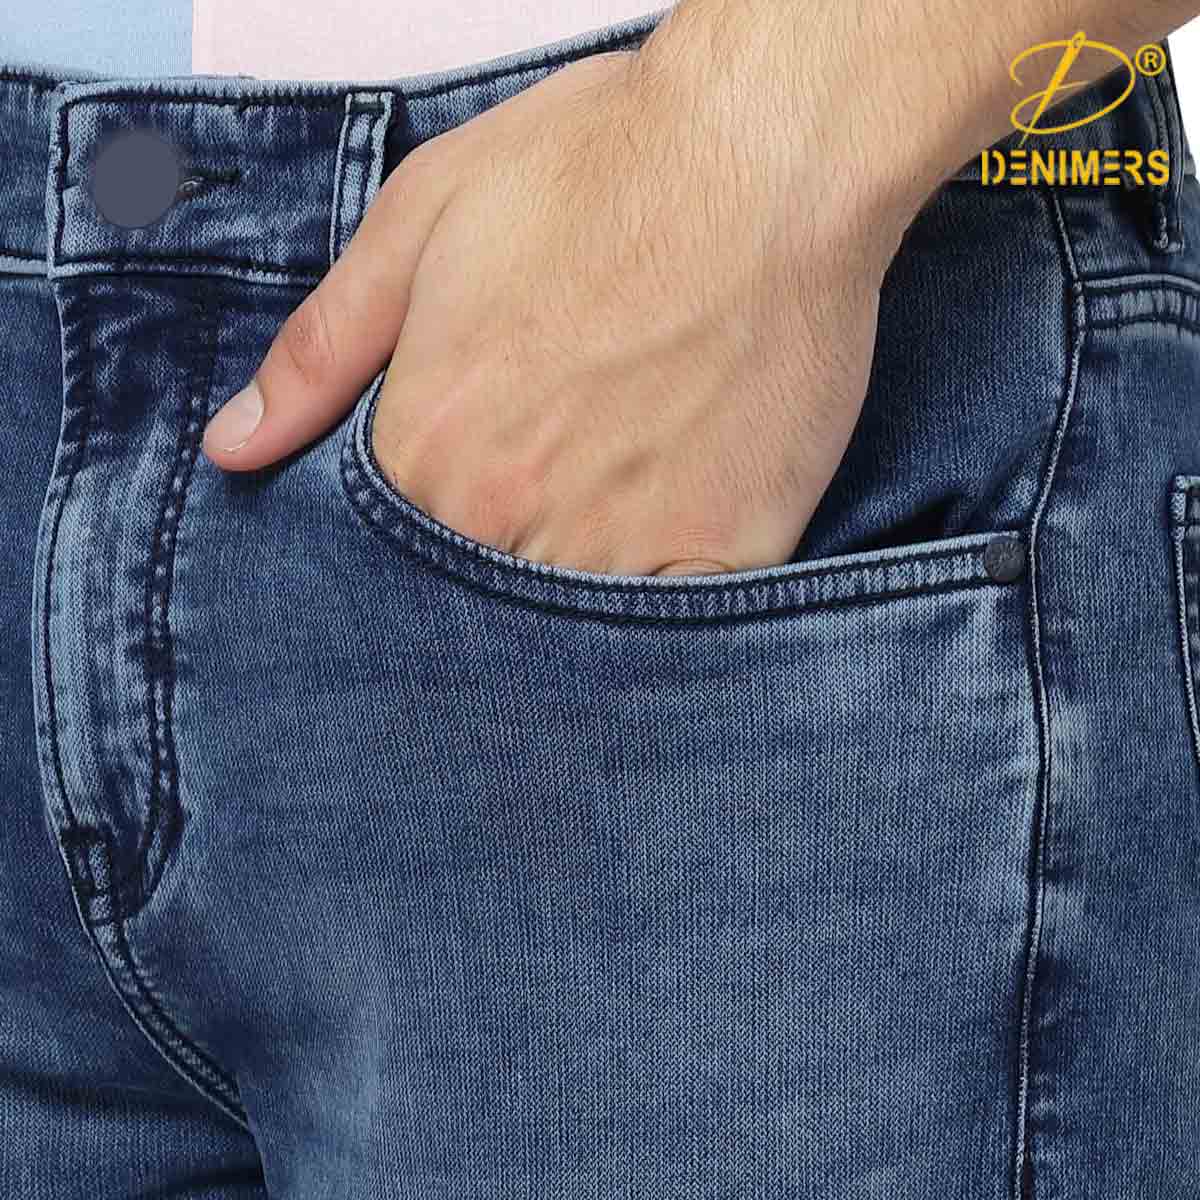 Men Denim Jeans 4 Tips For Finding the Perfect Fit